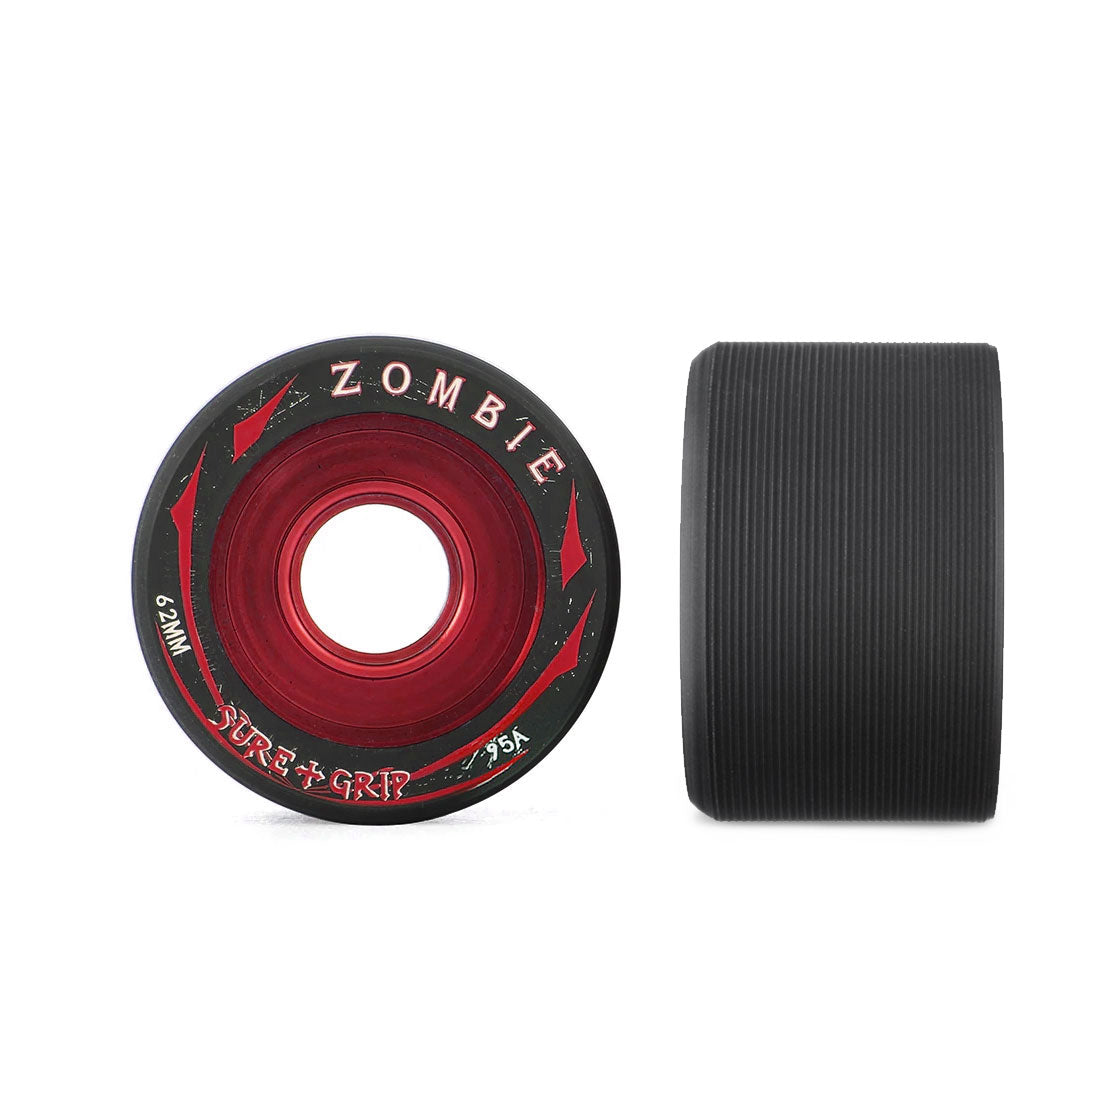 Sure-Grip Zombie Max 62x44mm 4pk Red 95A Roller Skate Wheels